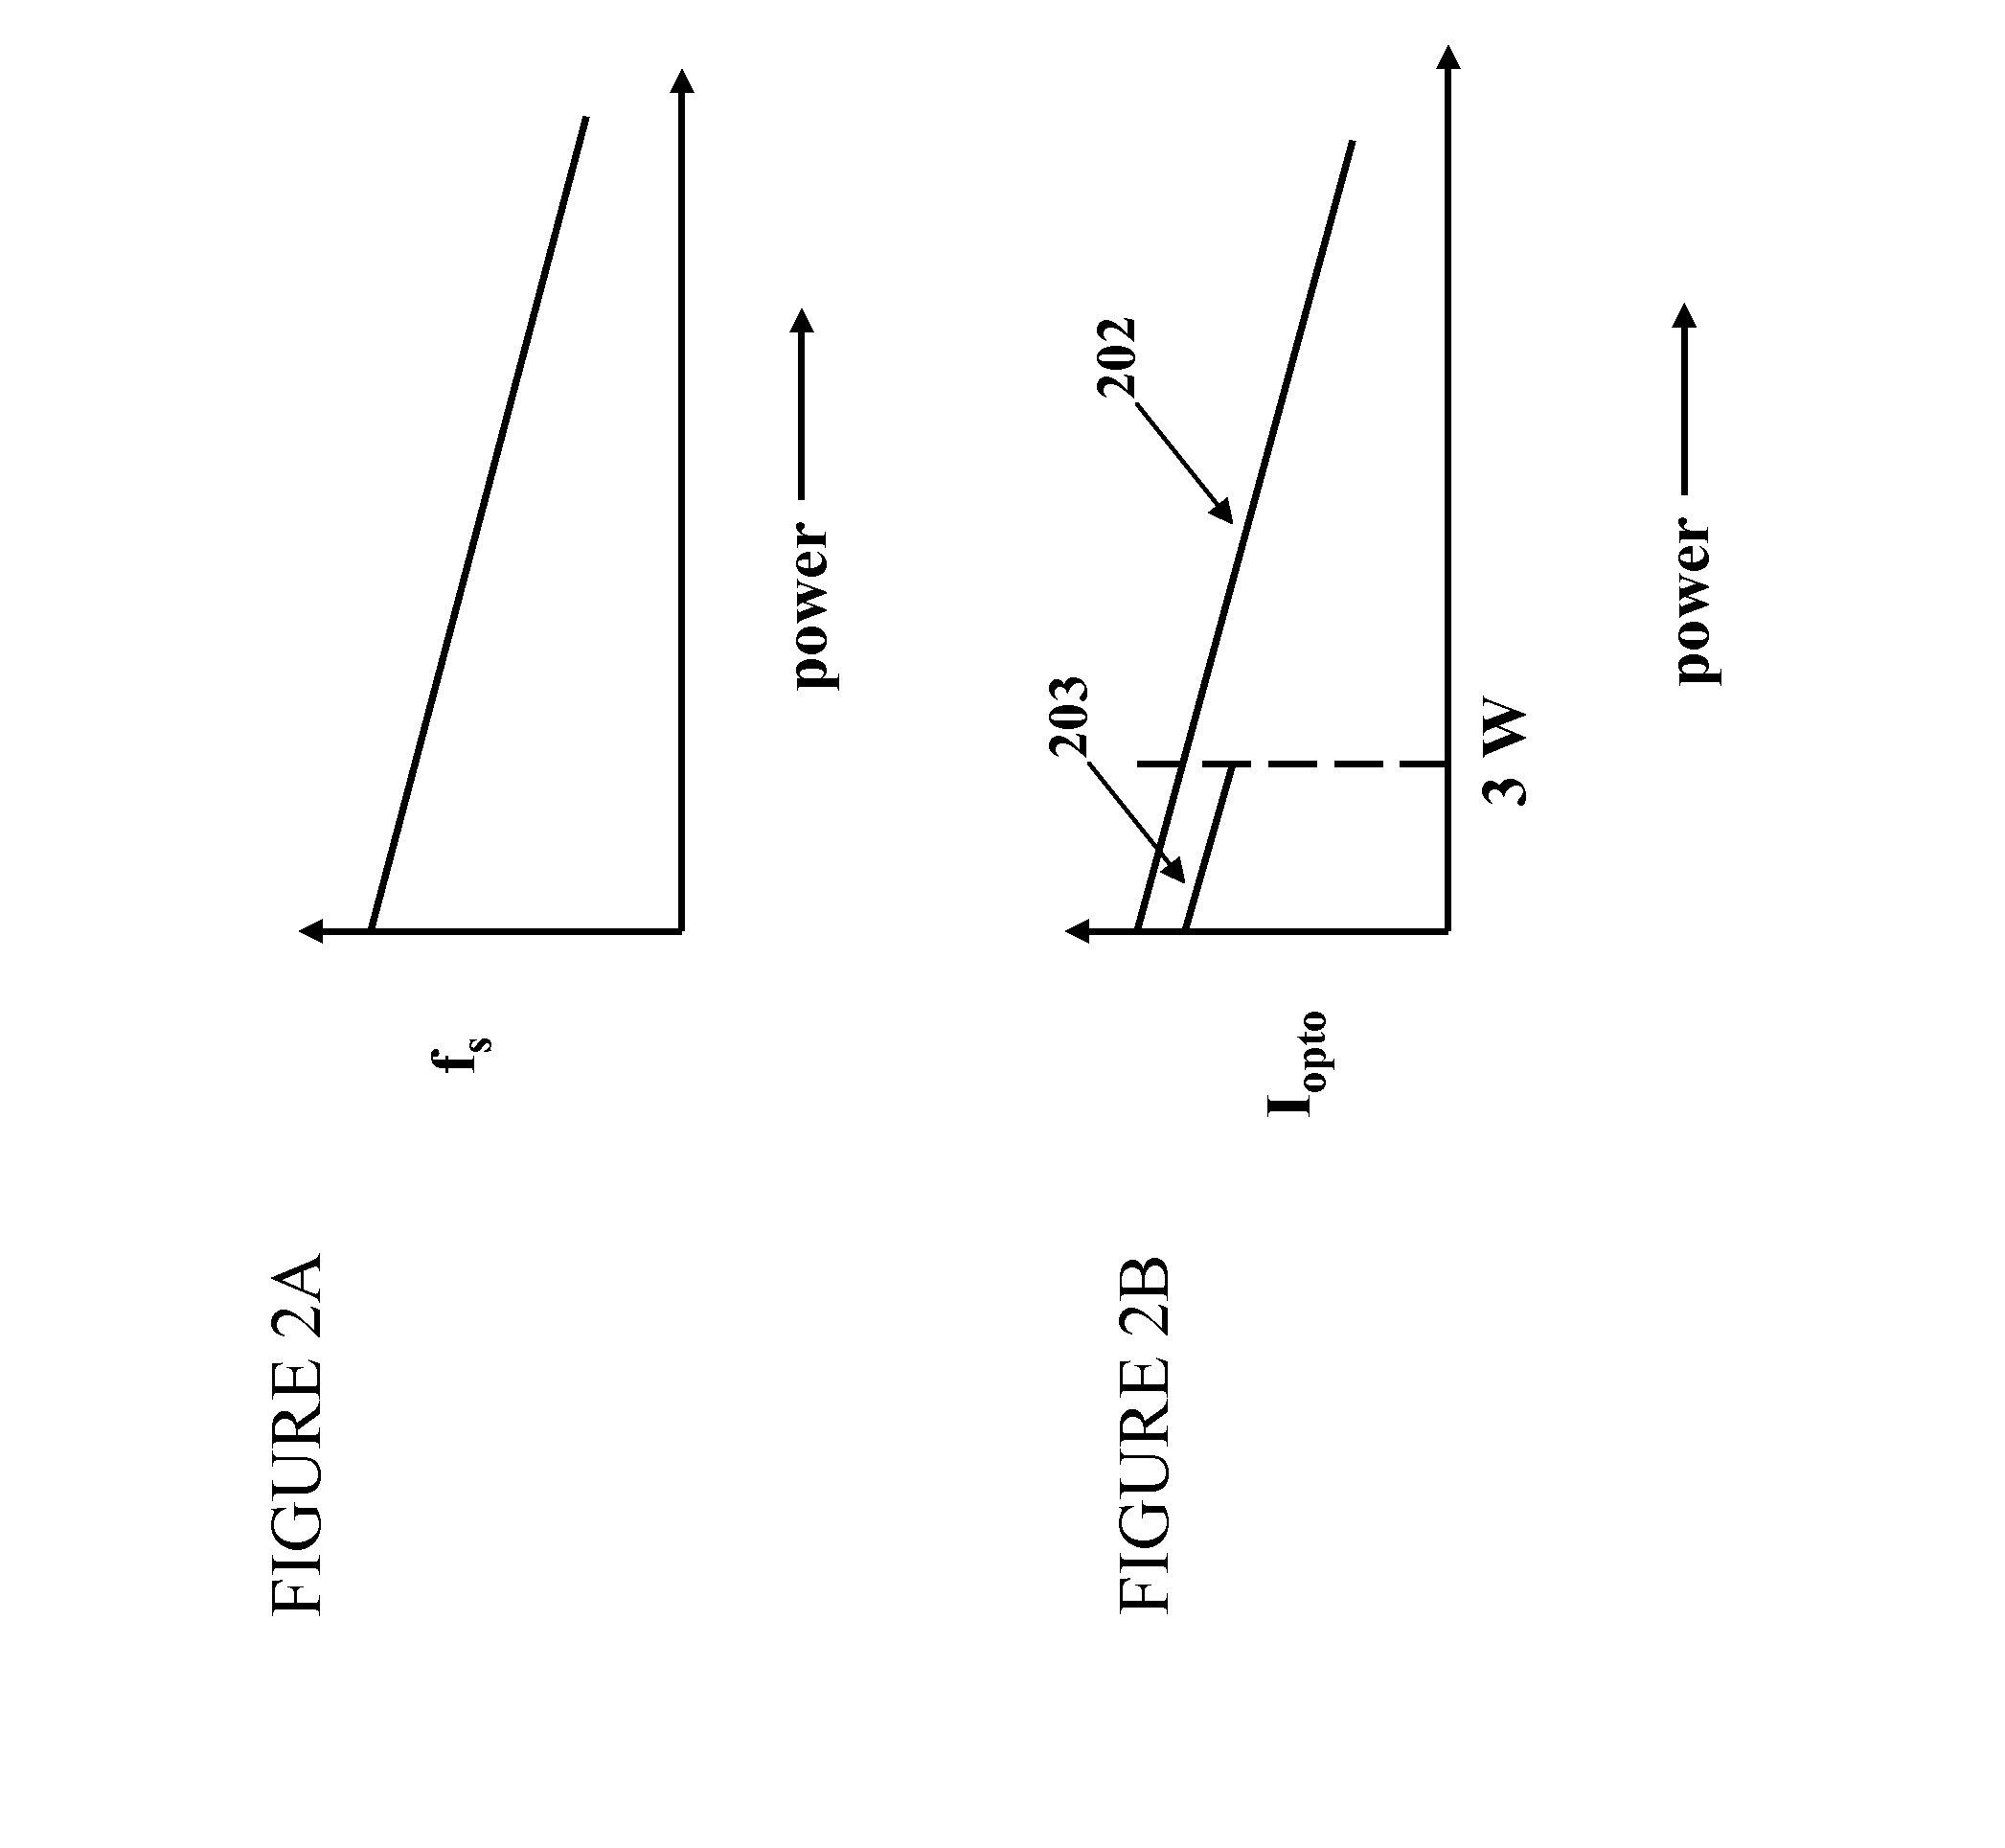 Control system for a power converter and method of operating the same